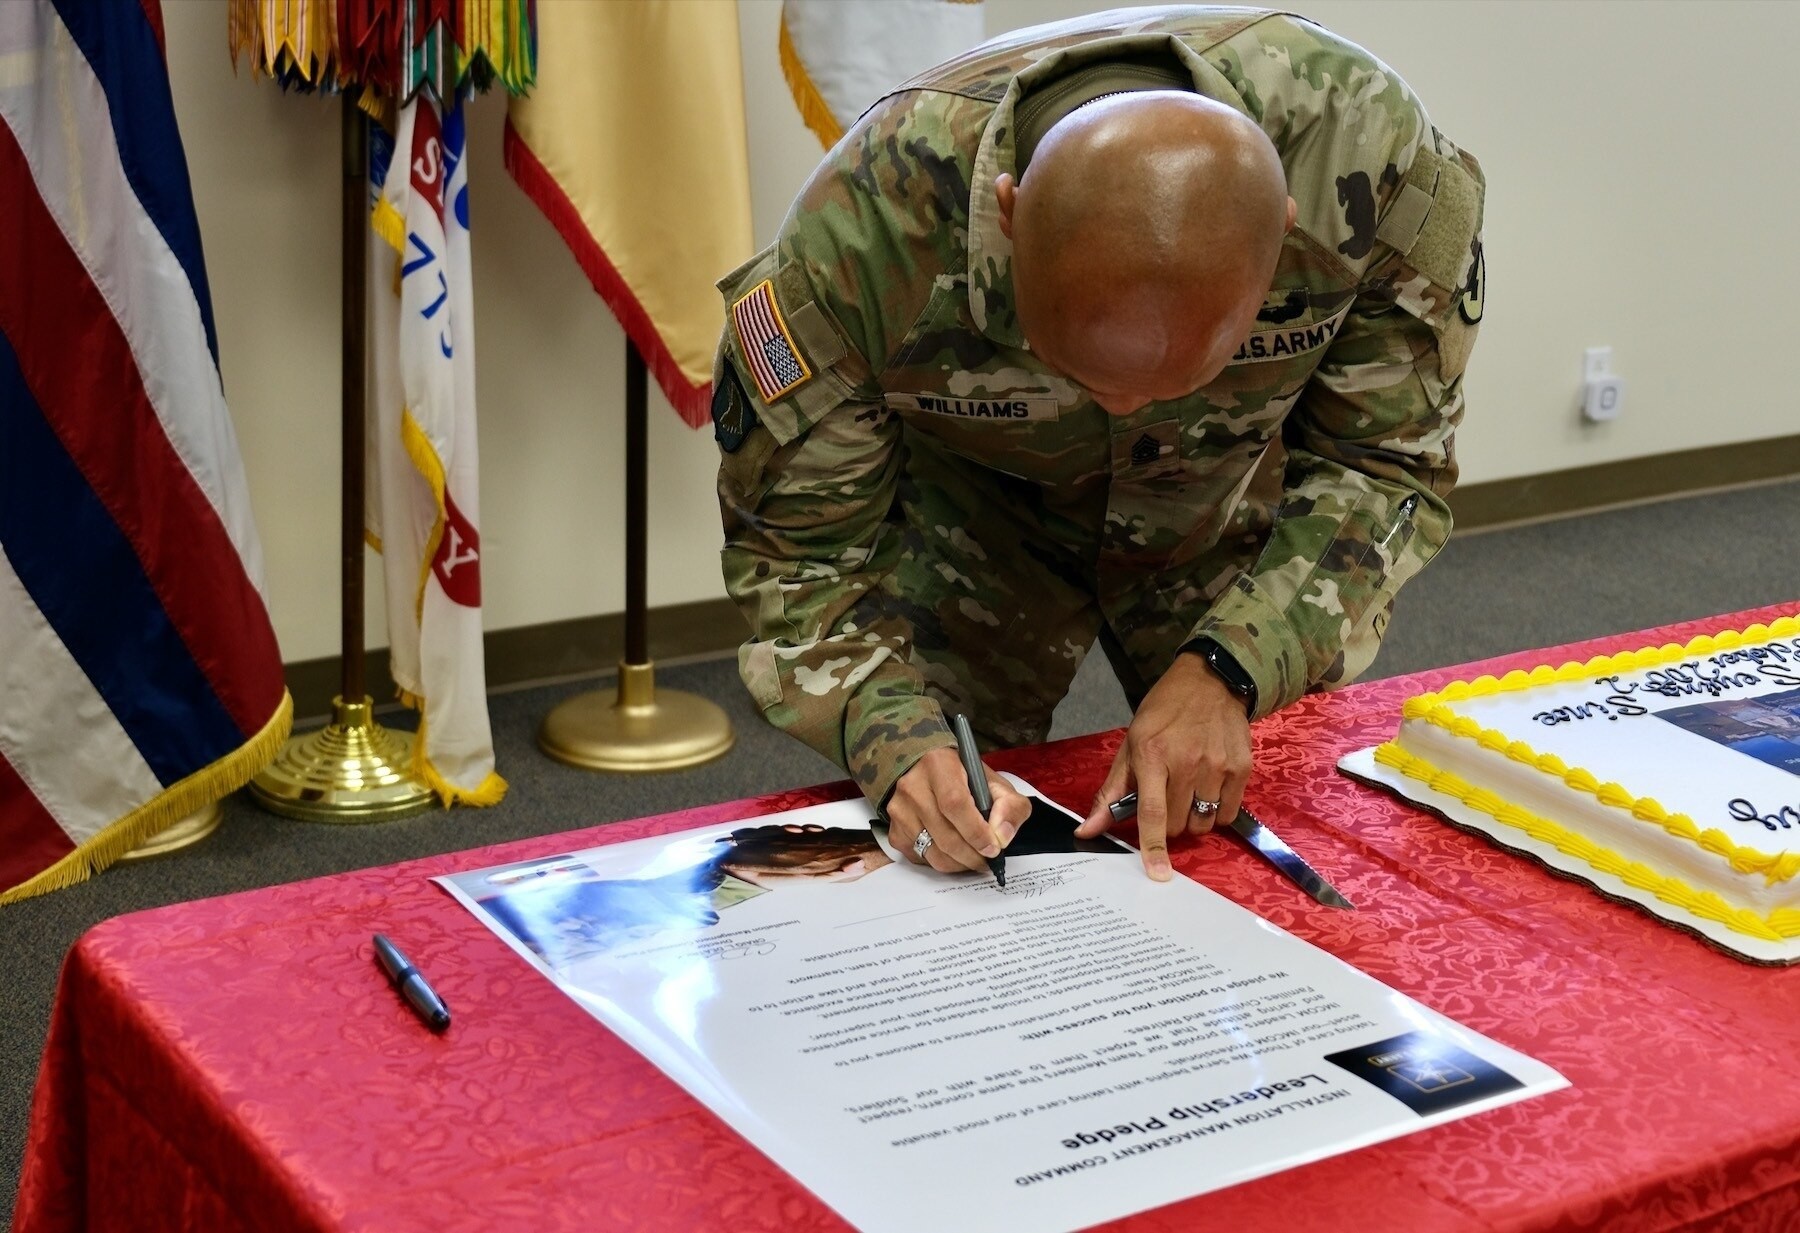 imcom-pacific-celebrates-20-years-enabling-army-readiness-leaders-sign